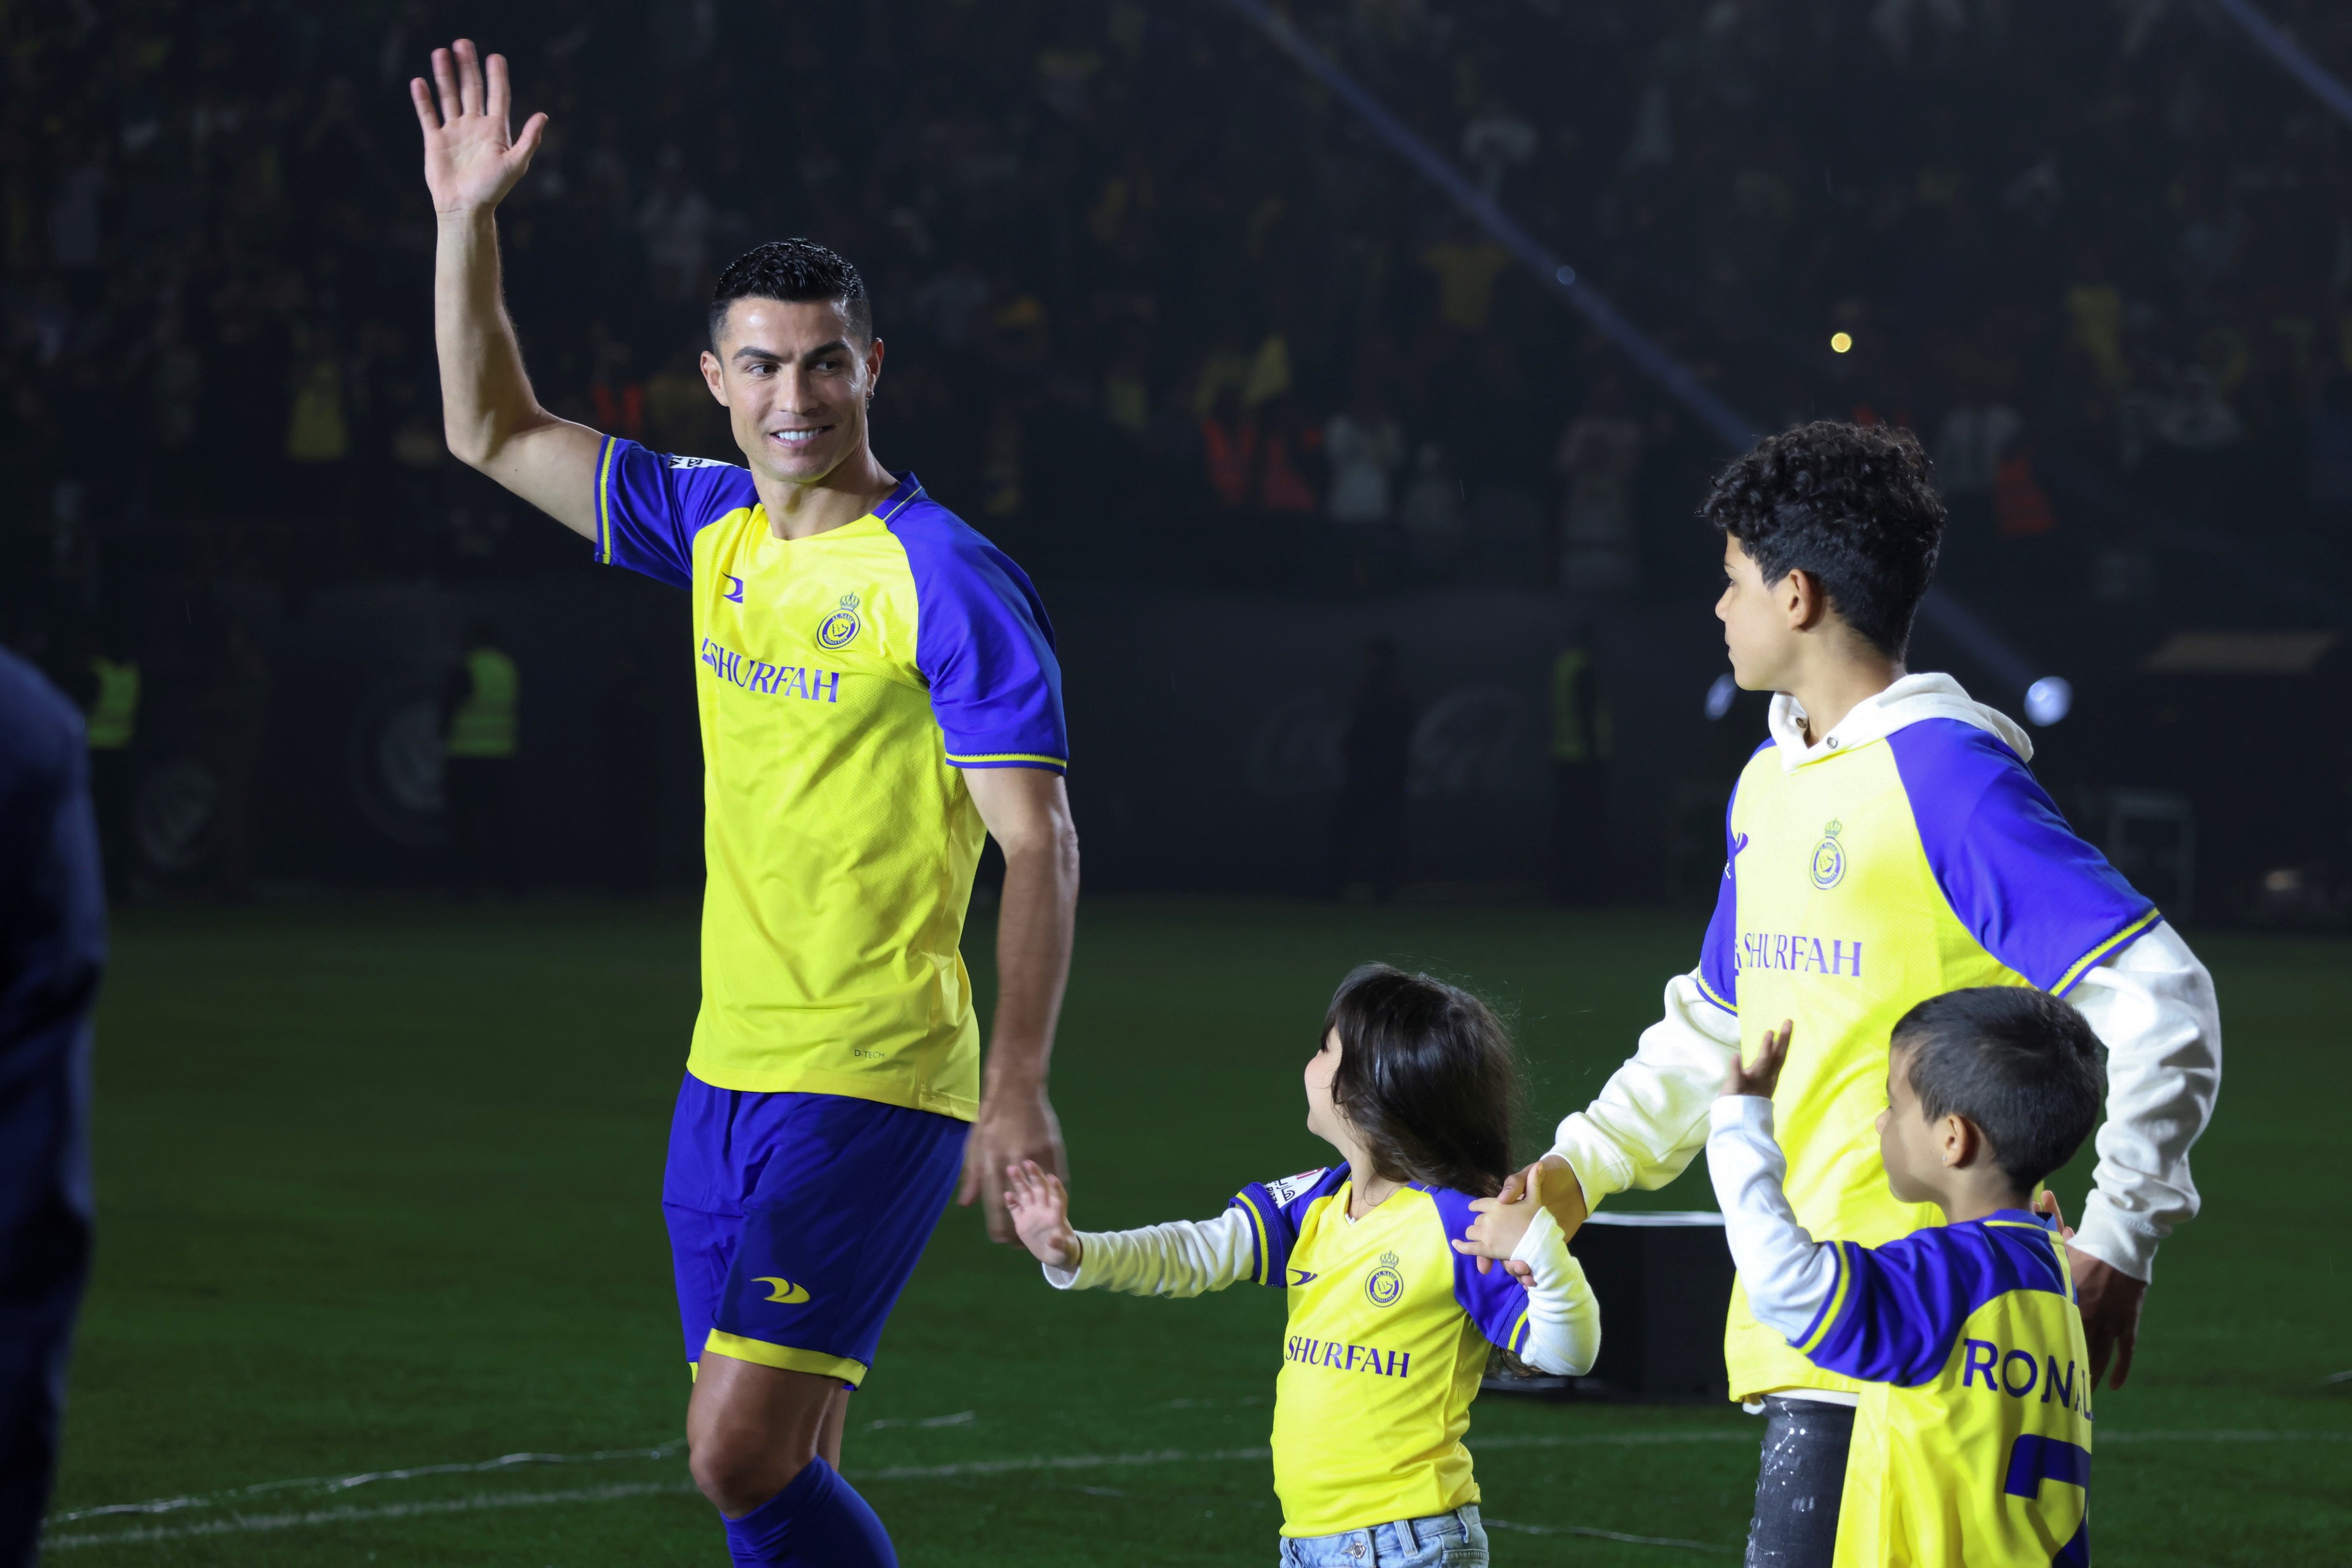 Al-Nassr's Portuguese forward Cristiano Ronaldo L with his family attends his unveiling at the Mrsool Park Stadium in the Saudi Arabia capital Riyadh on Jan. 3, 2023. (Photo by Wang Haizhou/Xinhua via Getty Images)